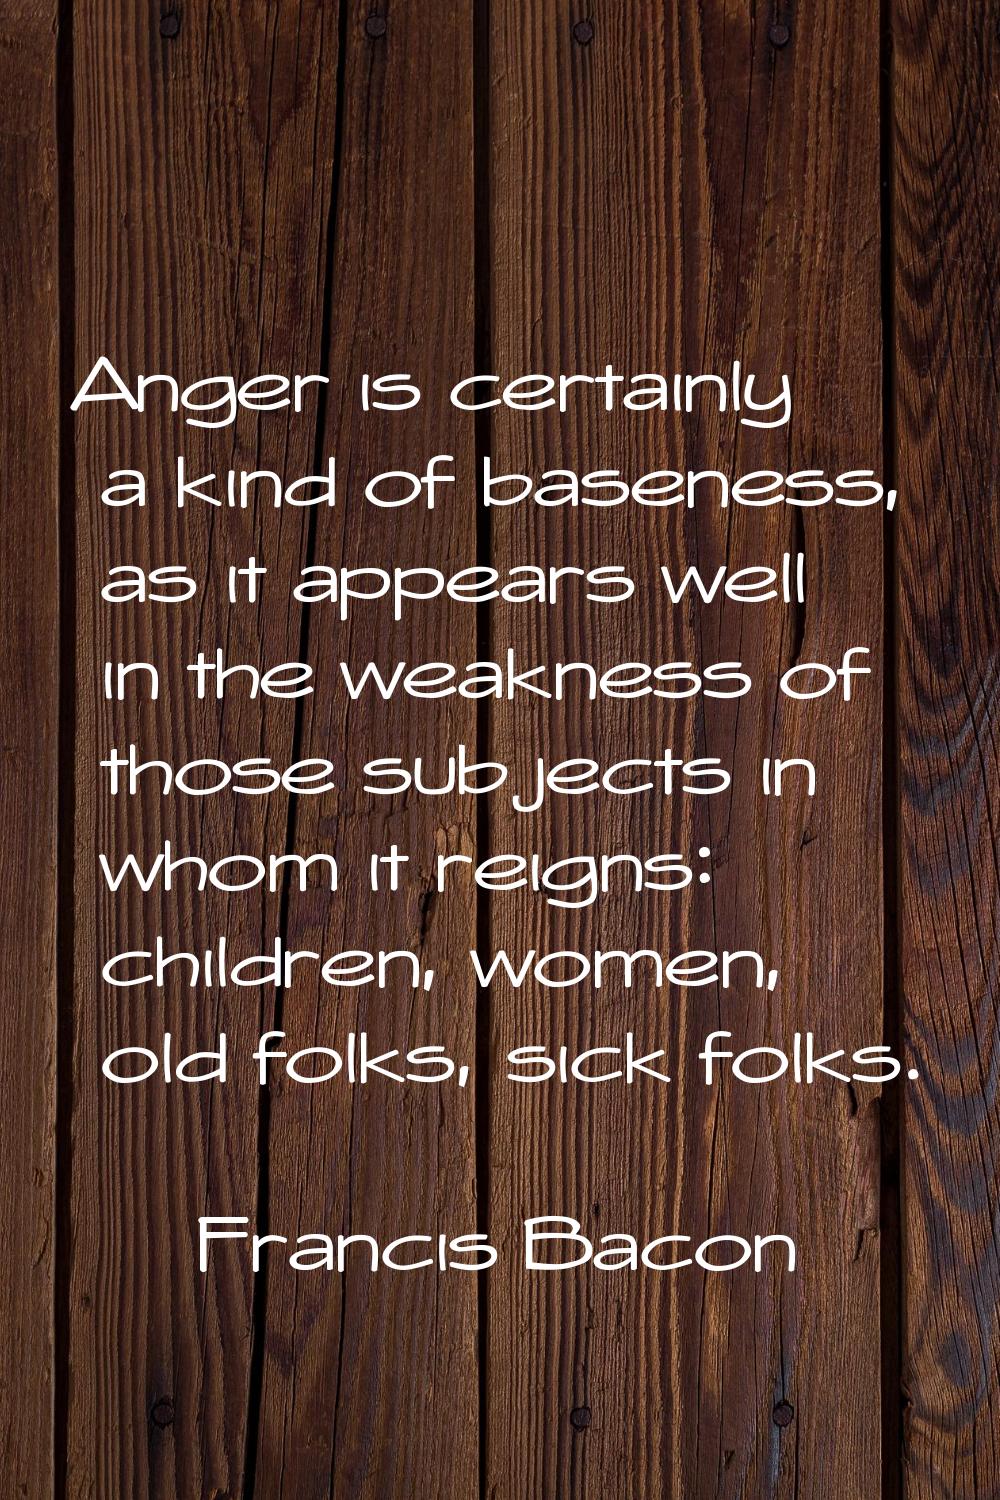 Anger is certainly a kind of baseness, as it appears well in the weakness of those subjects in whom